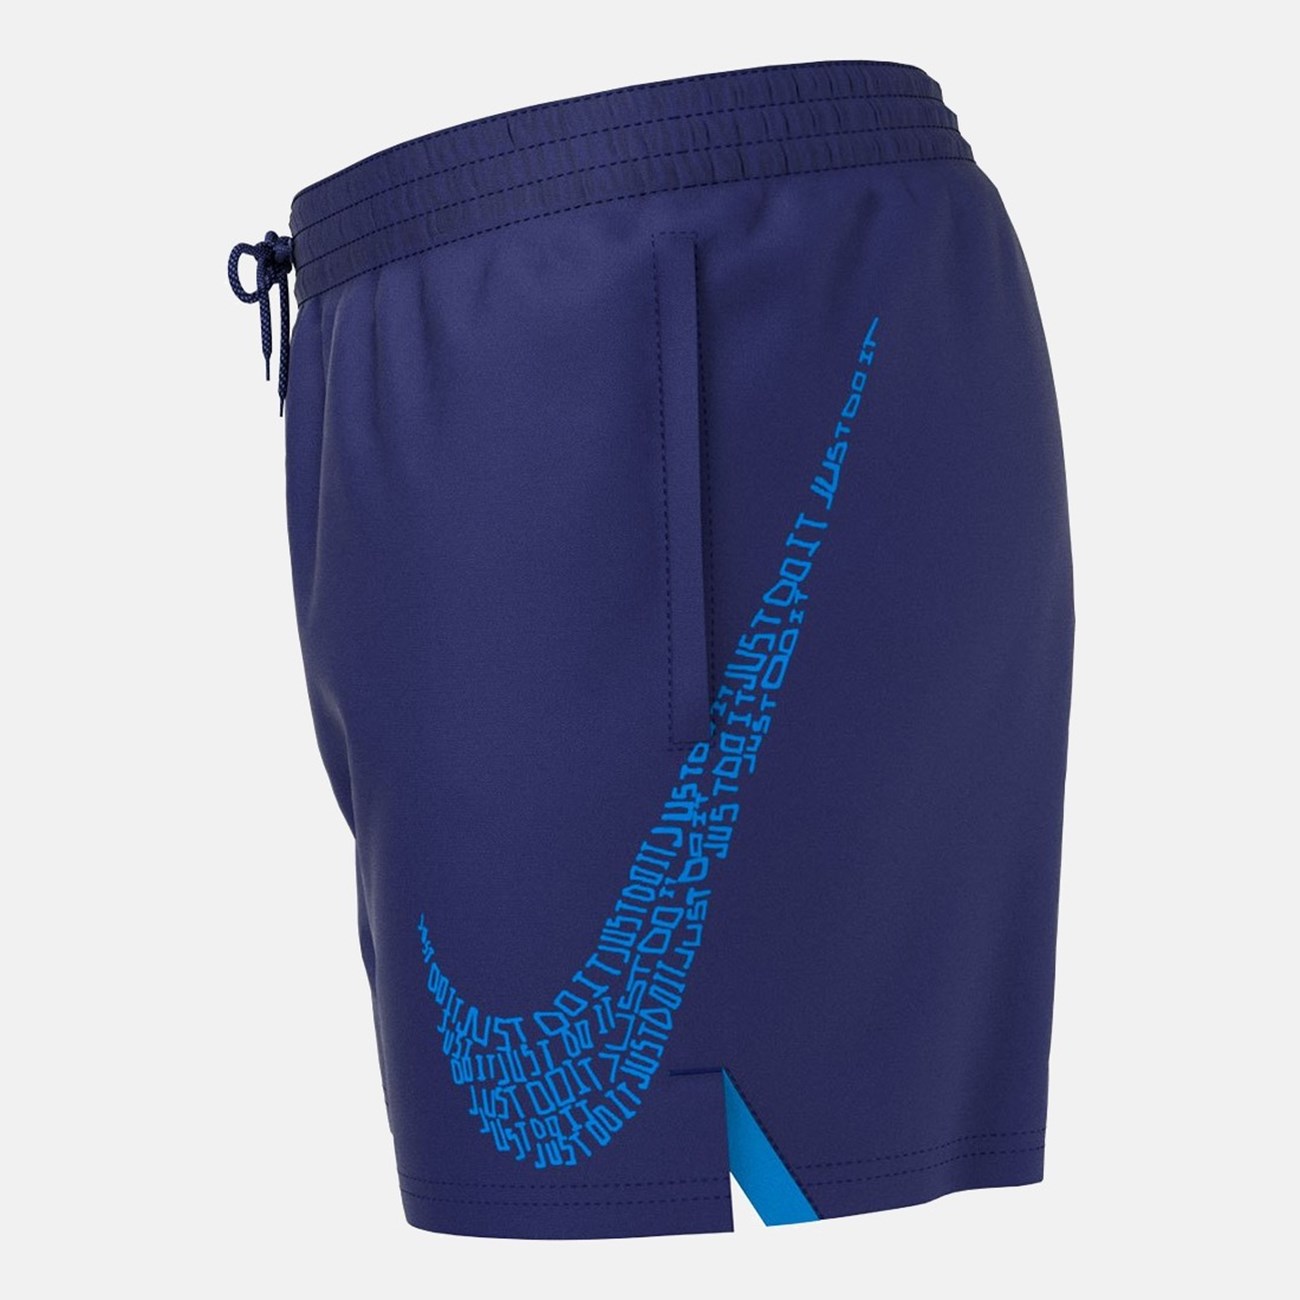 NIKE Ανδρικό Μαγιό 5” Volley Short NESSC476-440 - The Athlete's Foot